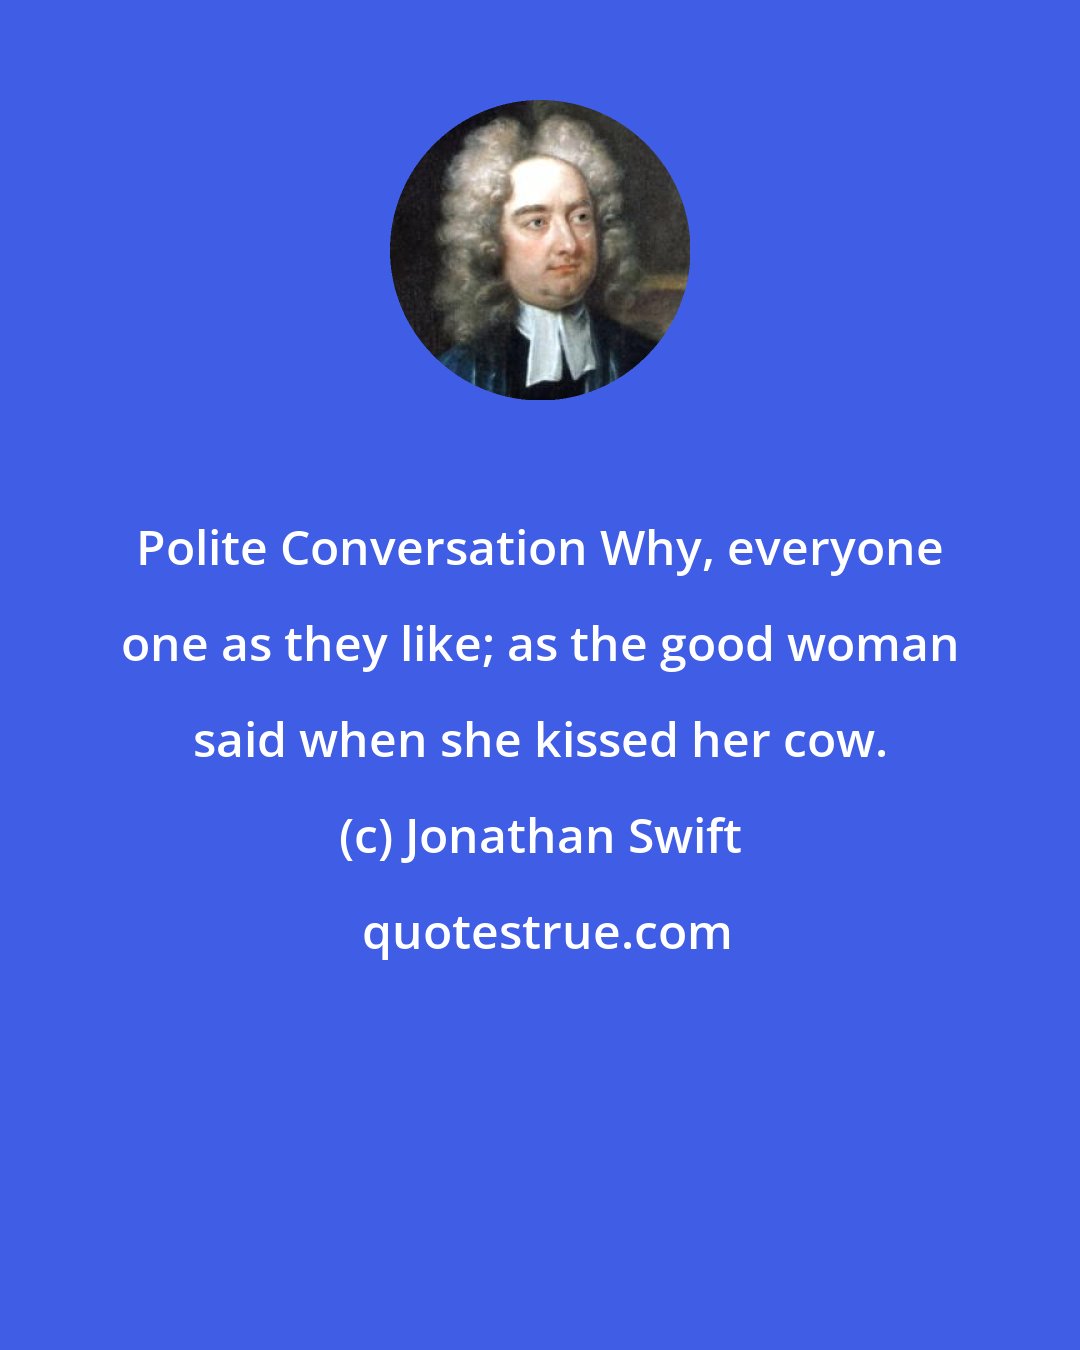 Jonathan Swift: Polite Conversation Why, everyone one as they like; as the good woman said when she kissed her cow.